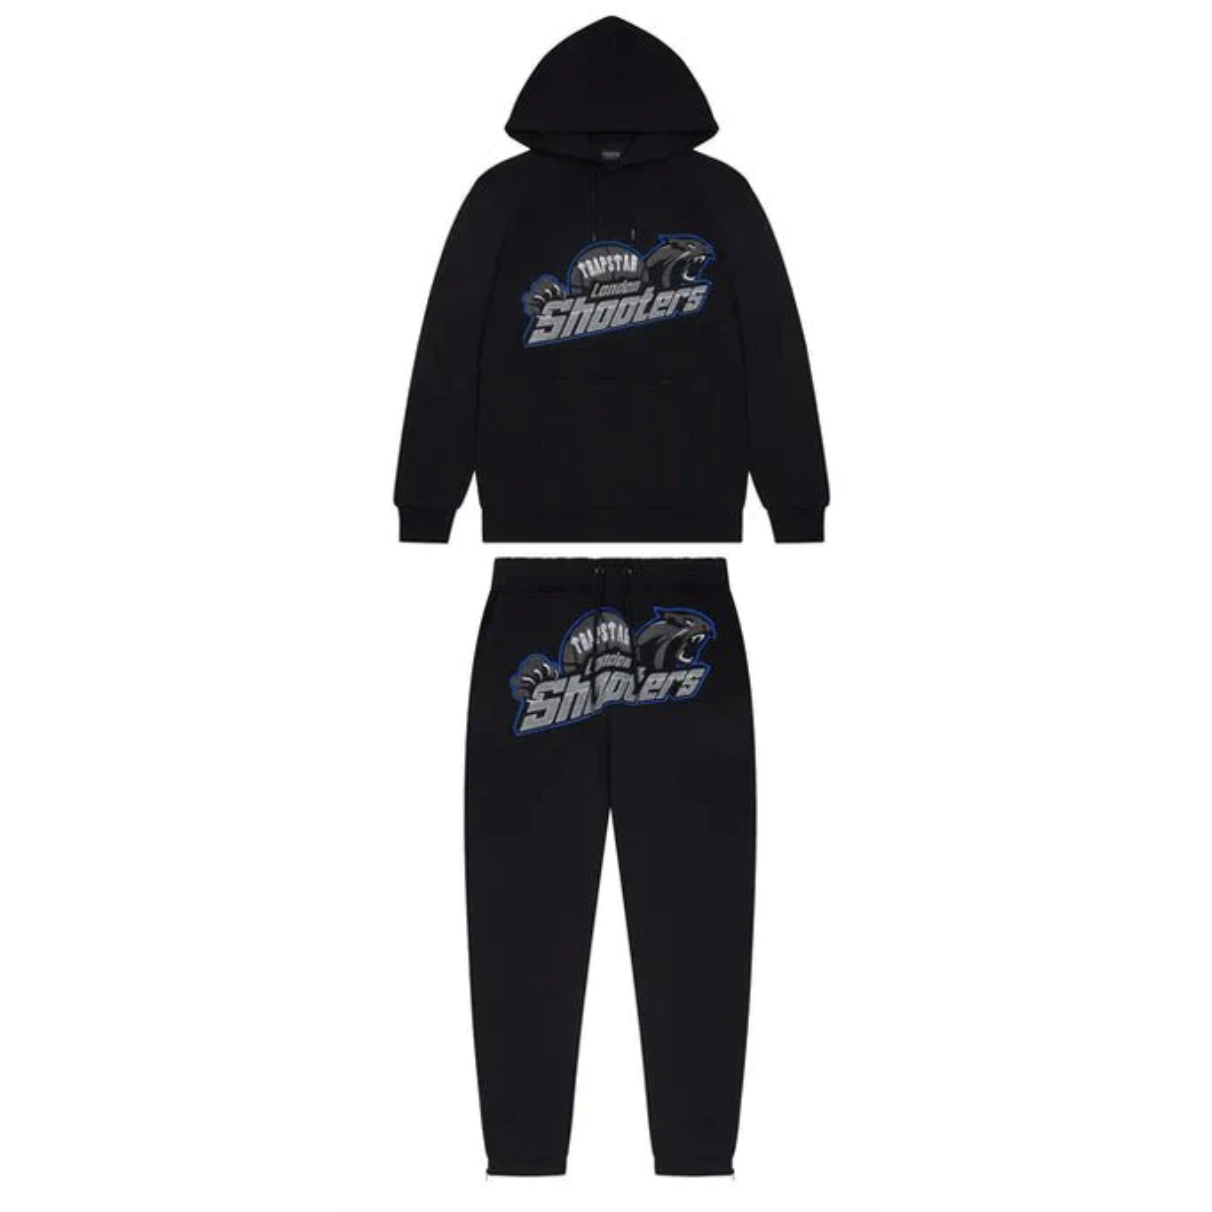 Trapstar Shooters Hooded Tracksuit Black Blue by Trapstar from £285.00